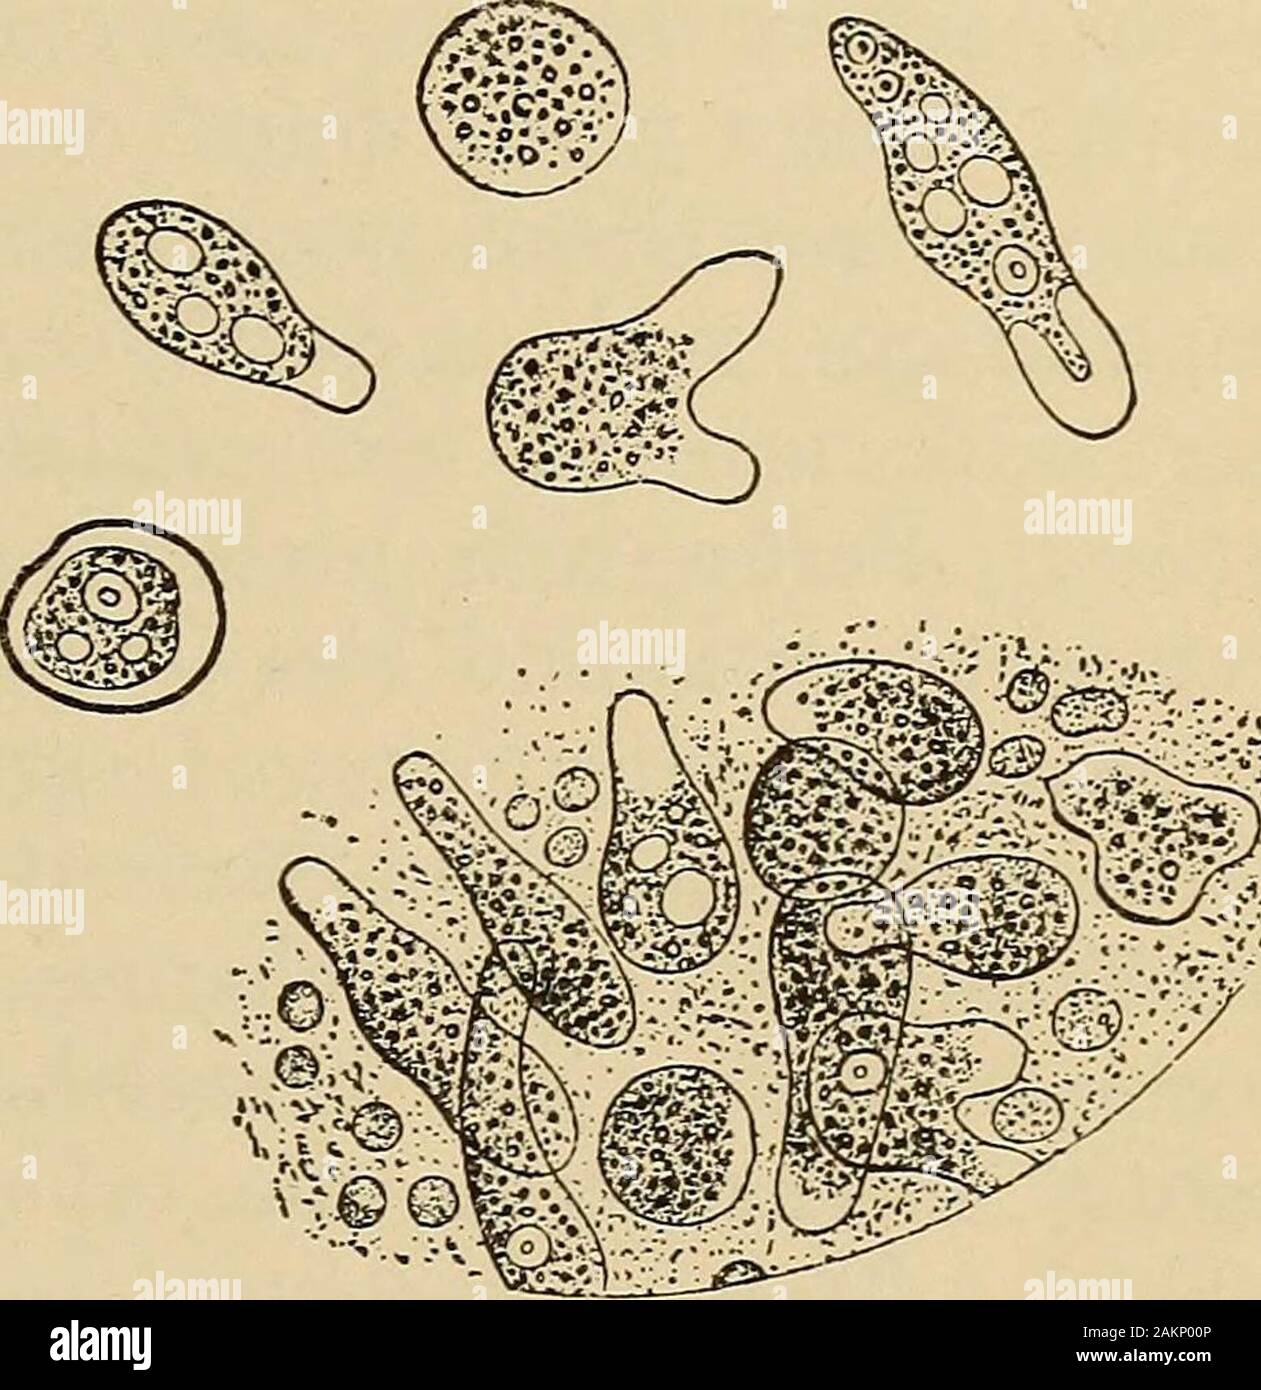 A treatise on the principles and practice of medicine . r from protrusion of pseudopodia, when theslide is slightly warmed; for diagnosis it must be motile. It is uni-cellular, and measures 10 to 50/x. Schaudinn distinguishes the innocuousEntameba coli from the pathogenic Entameba histolytica (Ameba dysen-teric), which is larger, has a highly refractile hyaline ectoplasm (moreclearly differentiated from the endoplasm), contains more vacuoles,has a sharper nucleus (5 to 7/x), and more frequent red-cell inclusions.Encysted amebse are resistant, dangerous forms, resembling the gametesof malaria ( Stock Photo